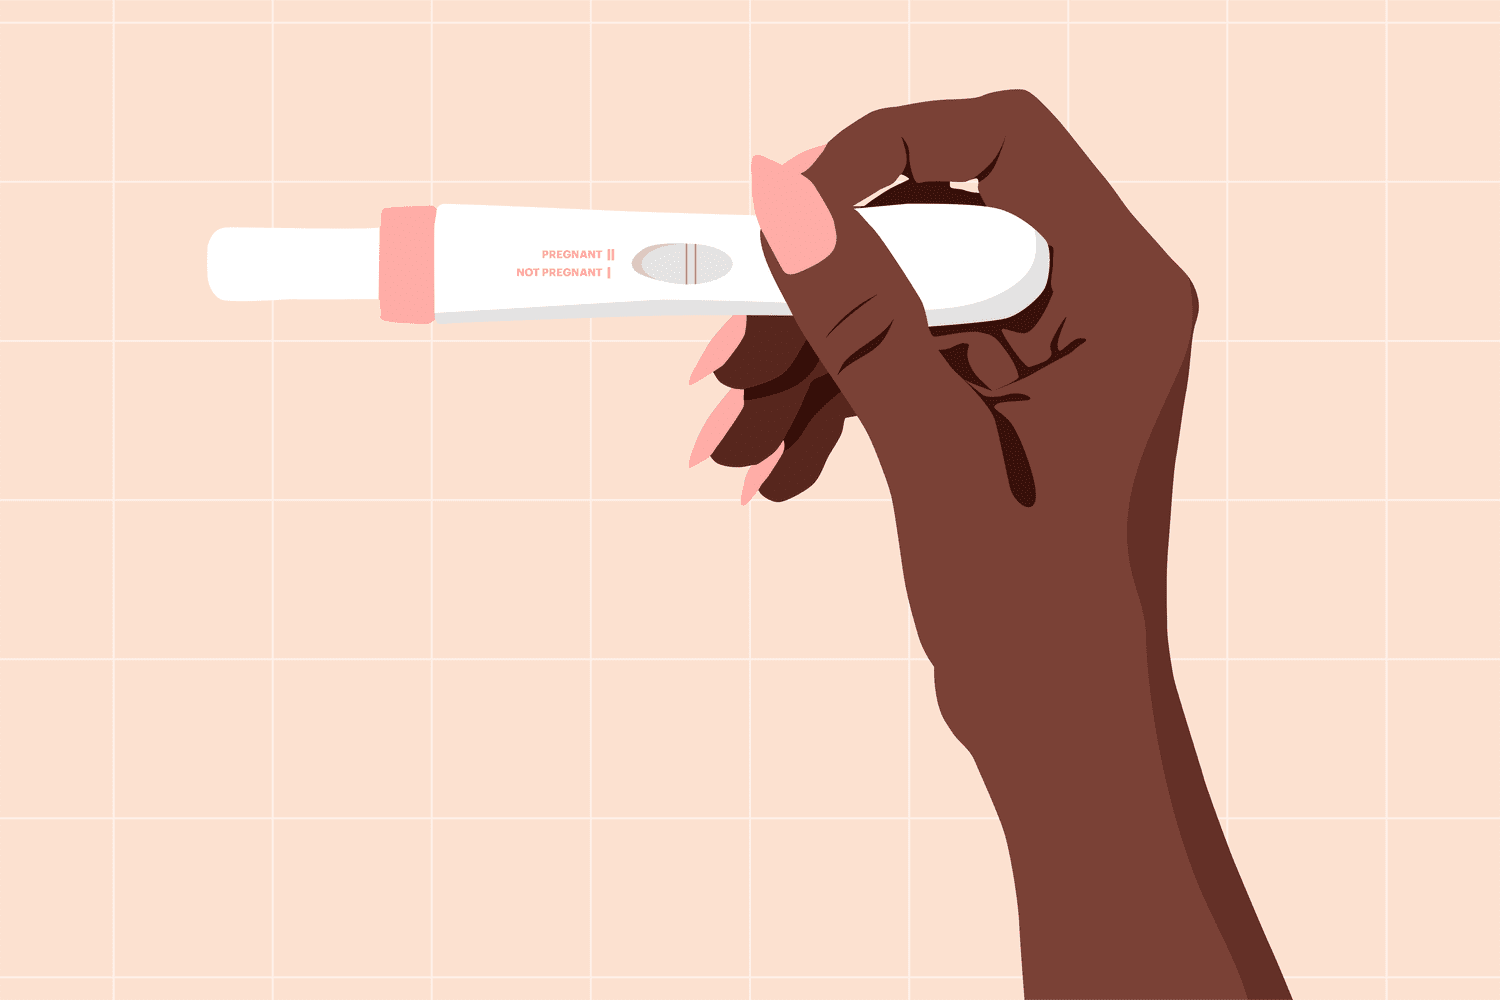 An illustration of a woman holding a pregnancy test.